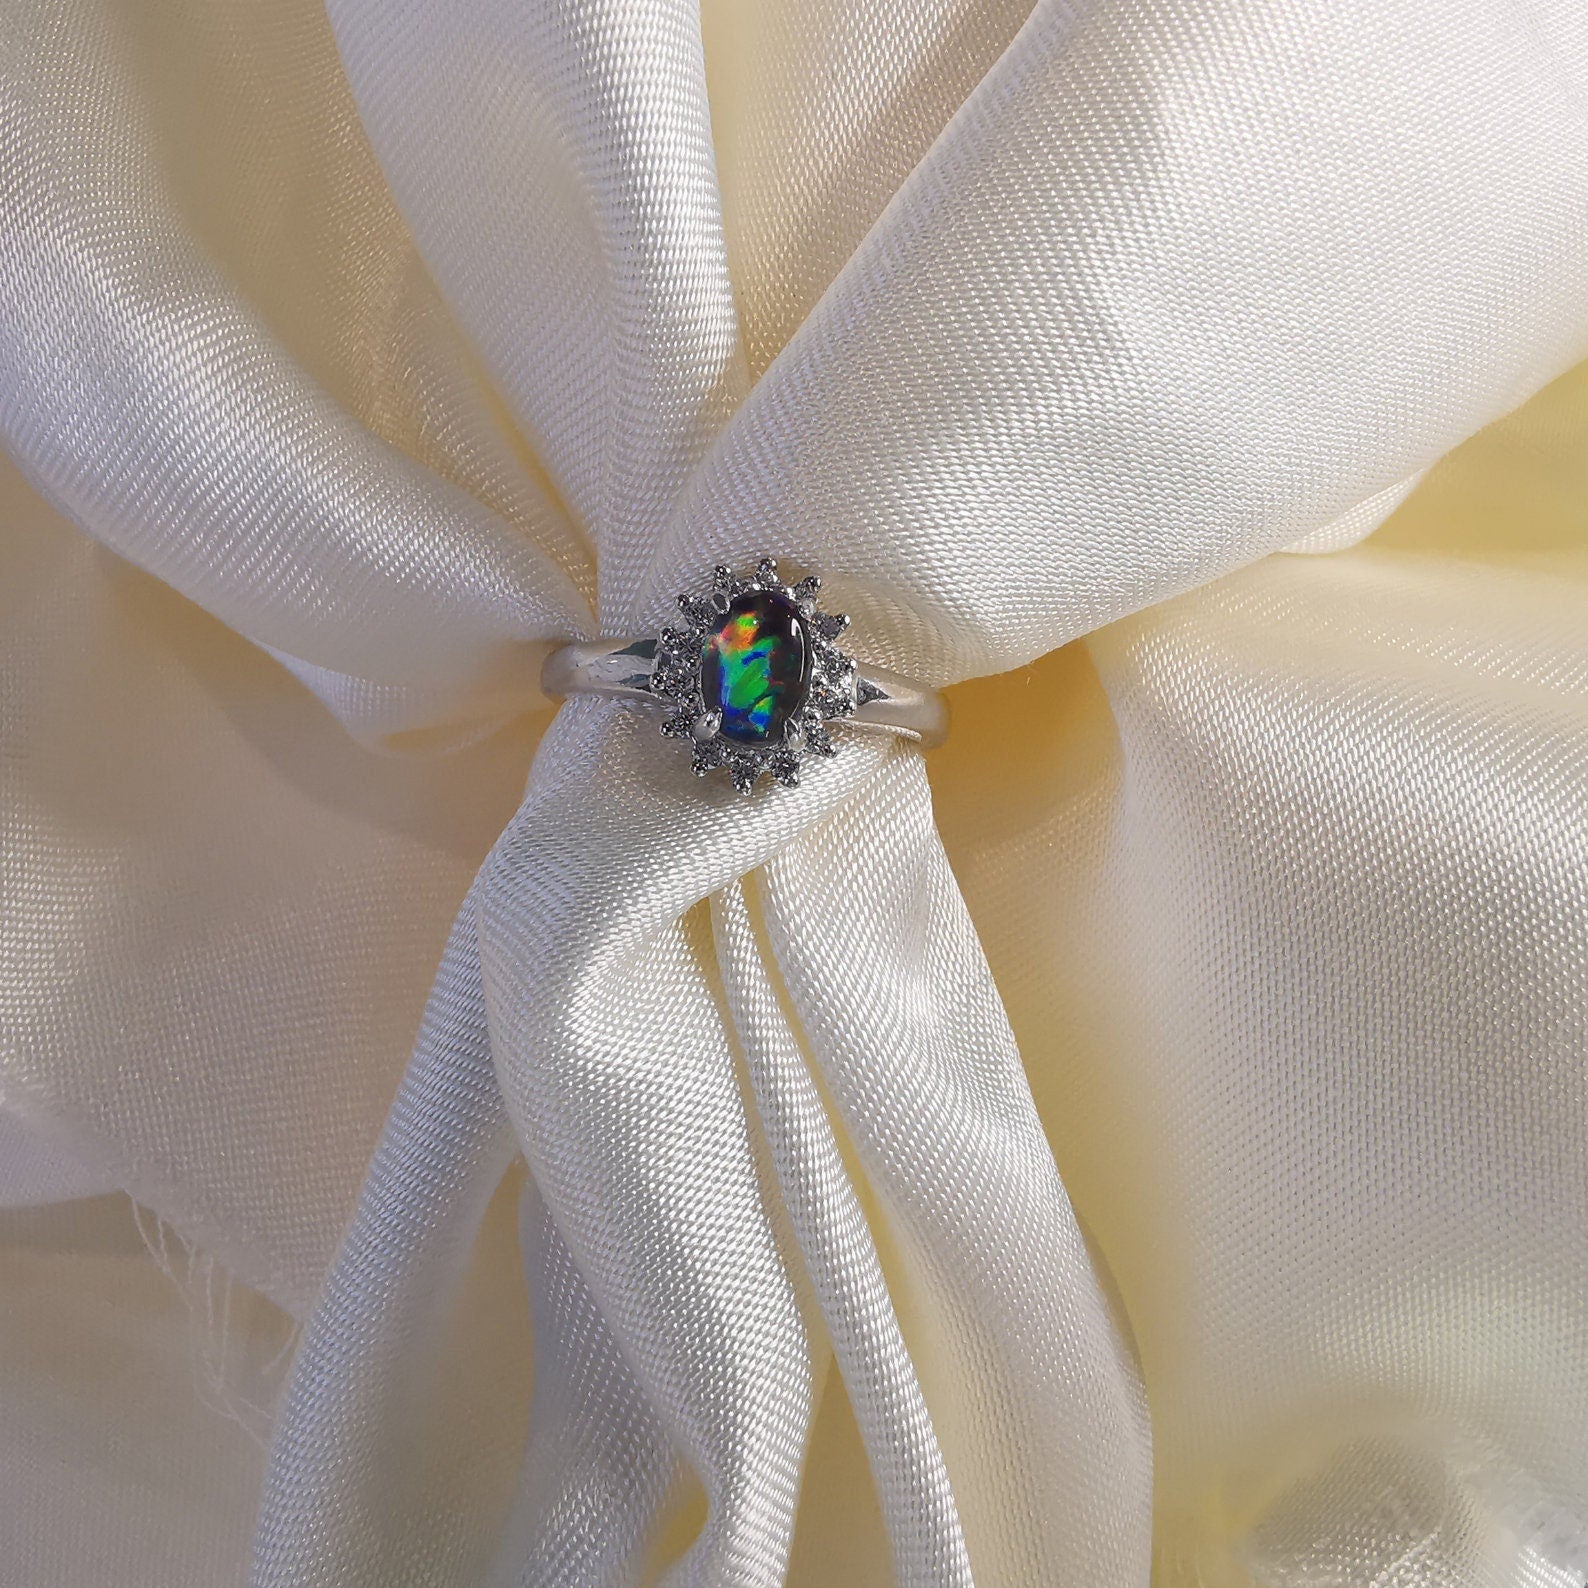 Elegant Triplet Opal Ring with Cubic Zirconias - Perfect Opal Gift-Vsabel Jewellery